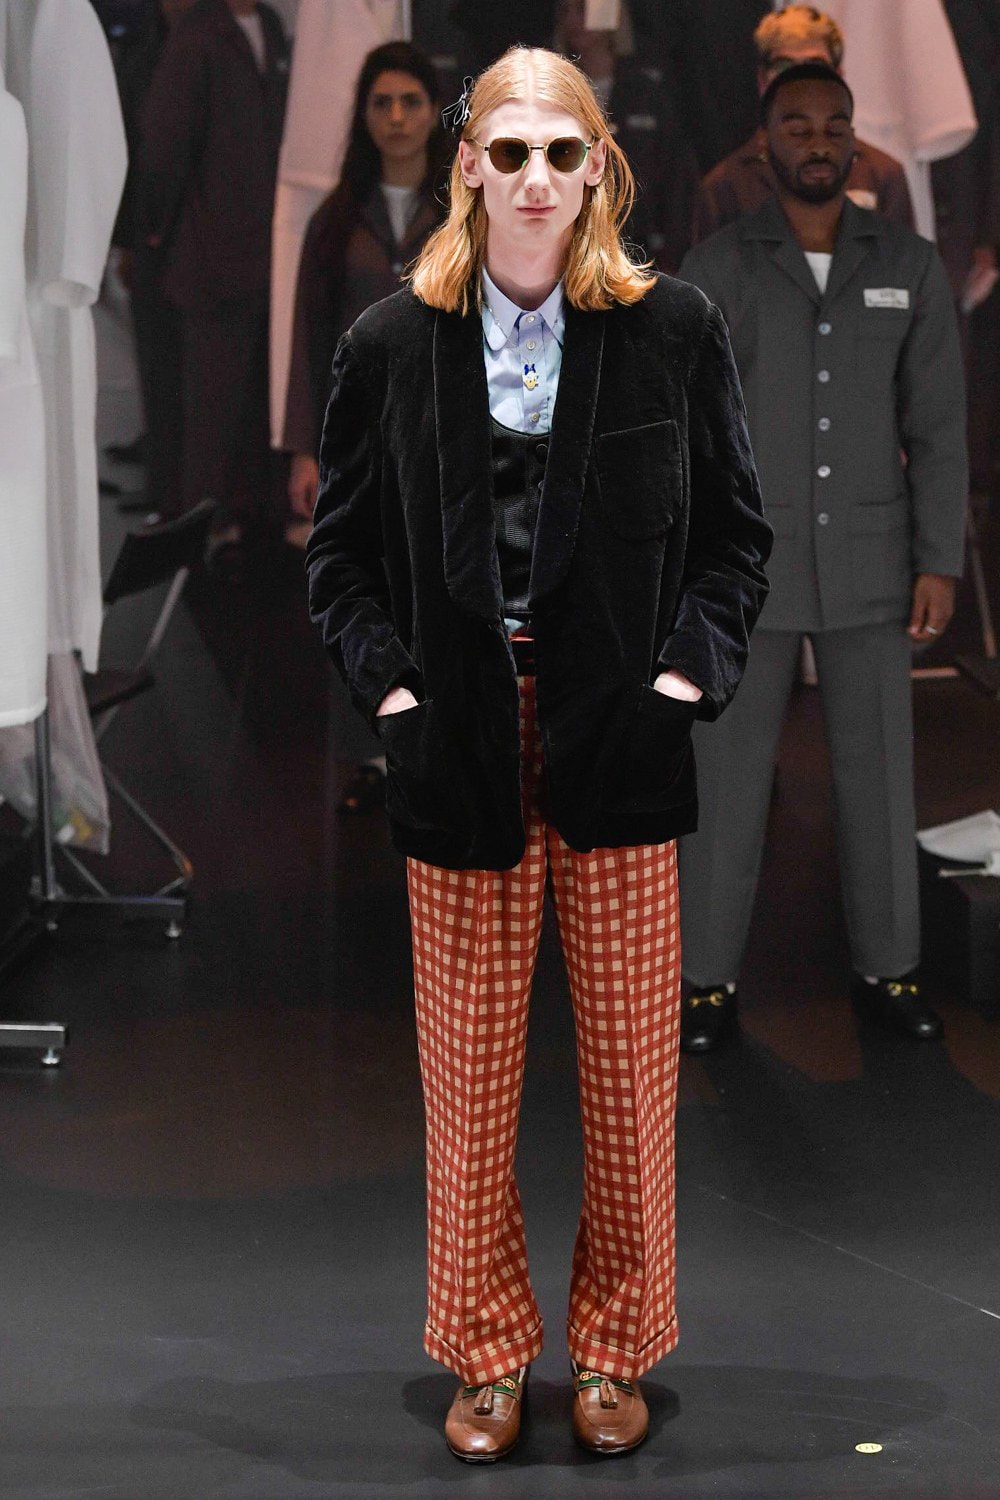 Gucci Fall/Winter 2020 Collection Runway Show Velvet Jacket Black Plaid Pants Red